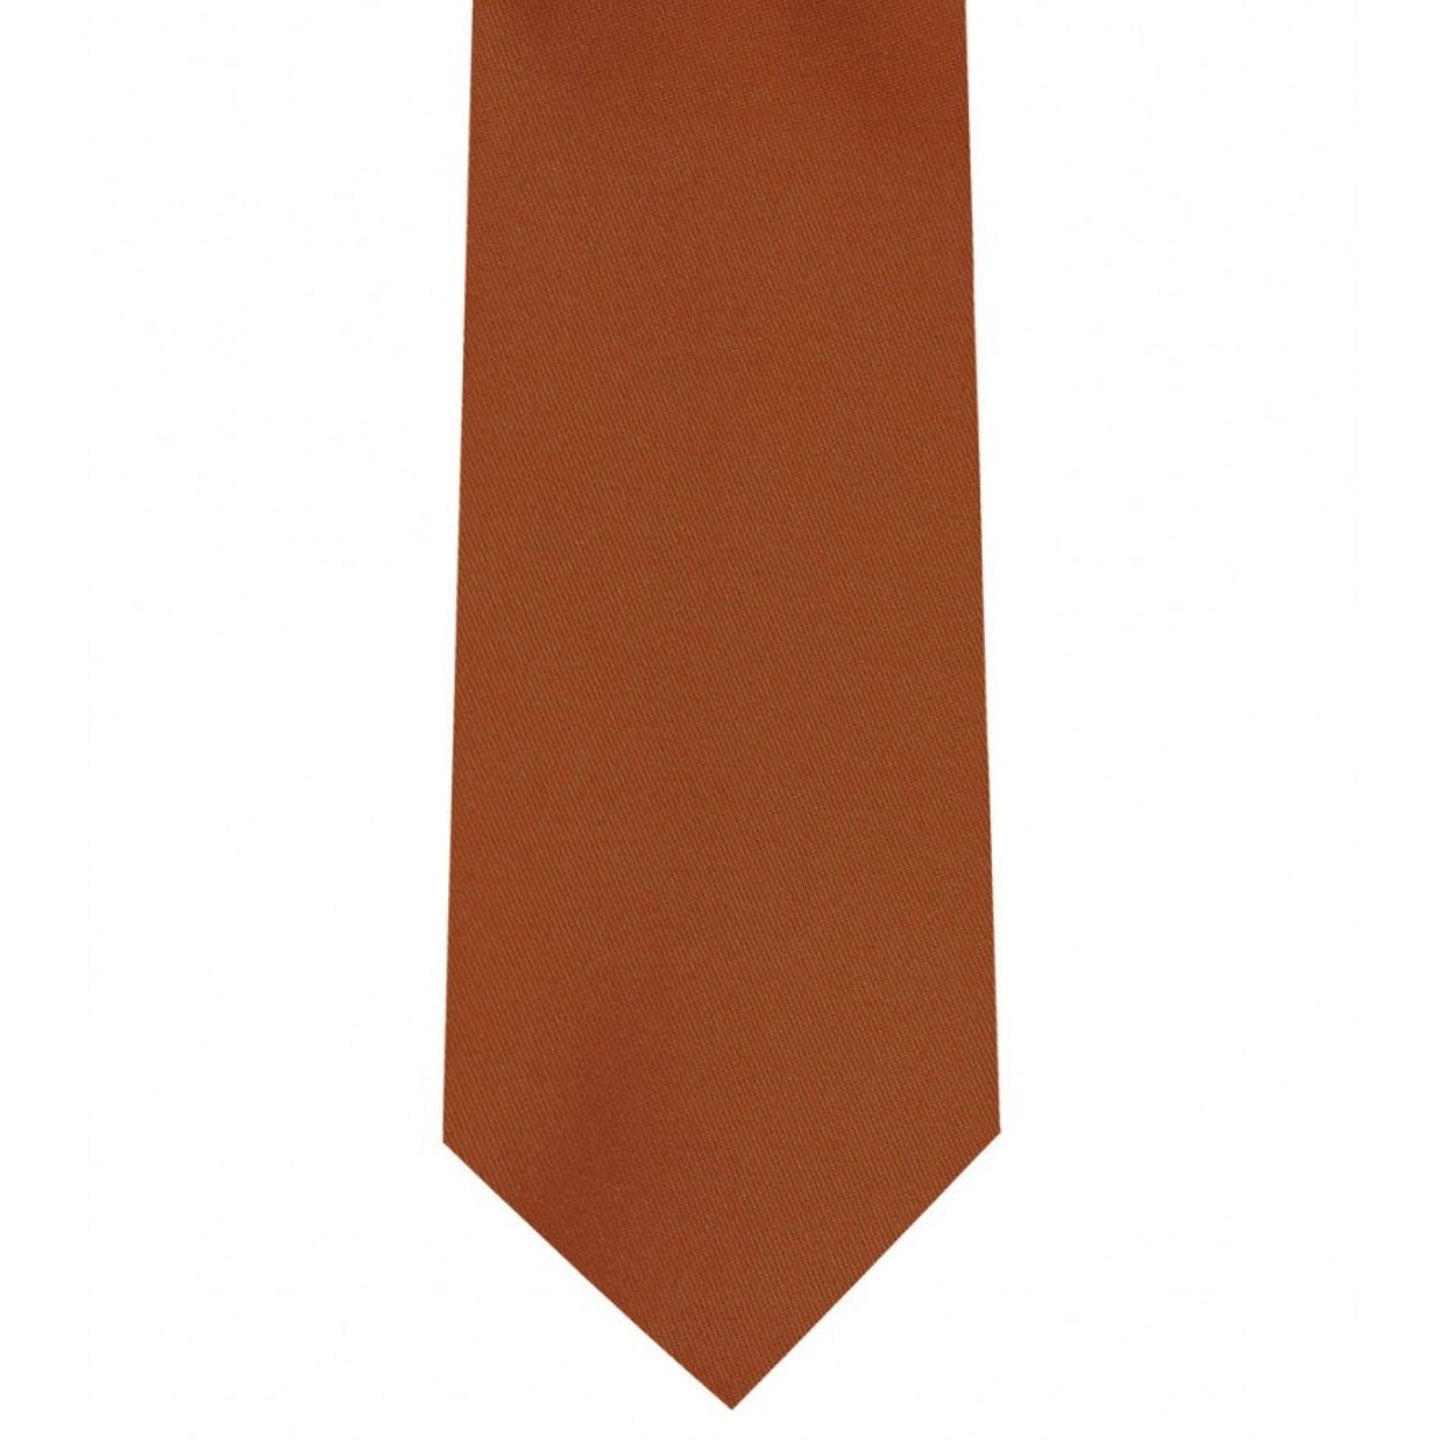 Classic Cinnamon Tie Ultra Skinny tie width 2.25 inches With Matching Pocket Square | KCT Menswear